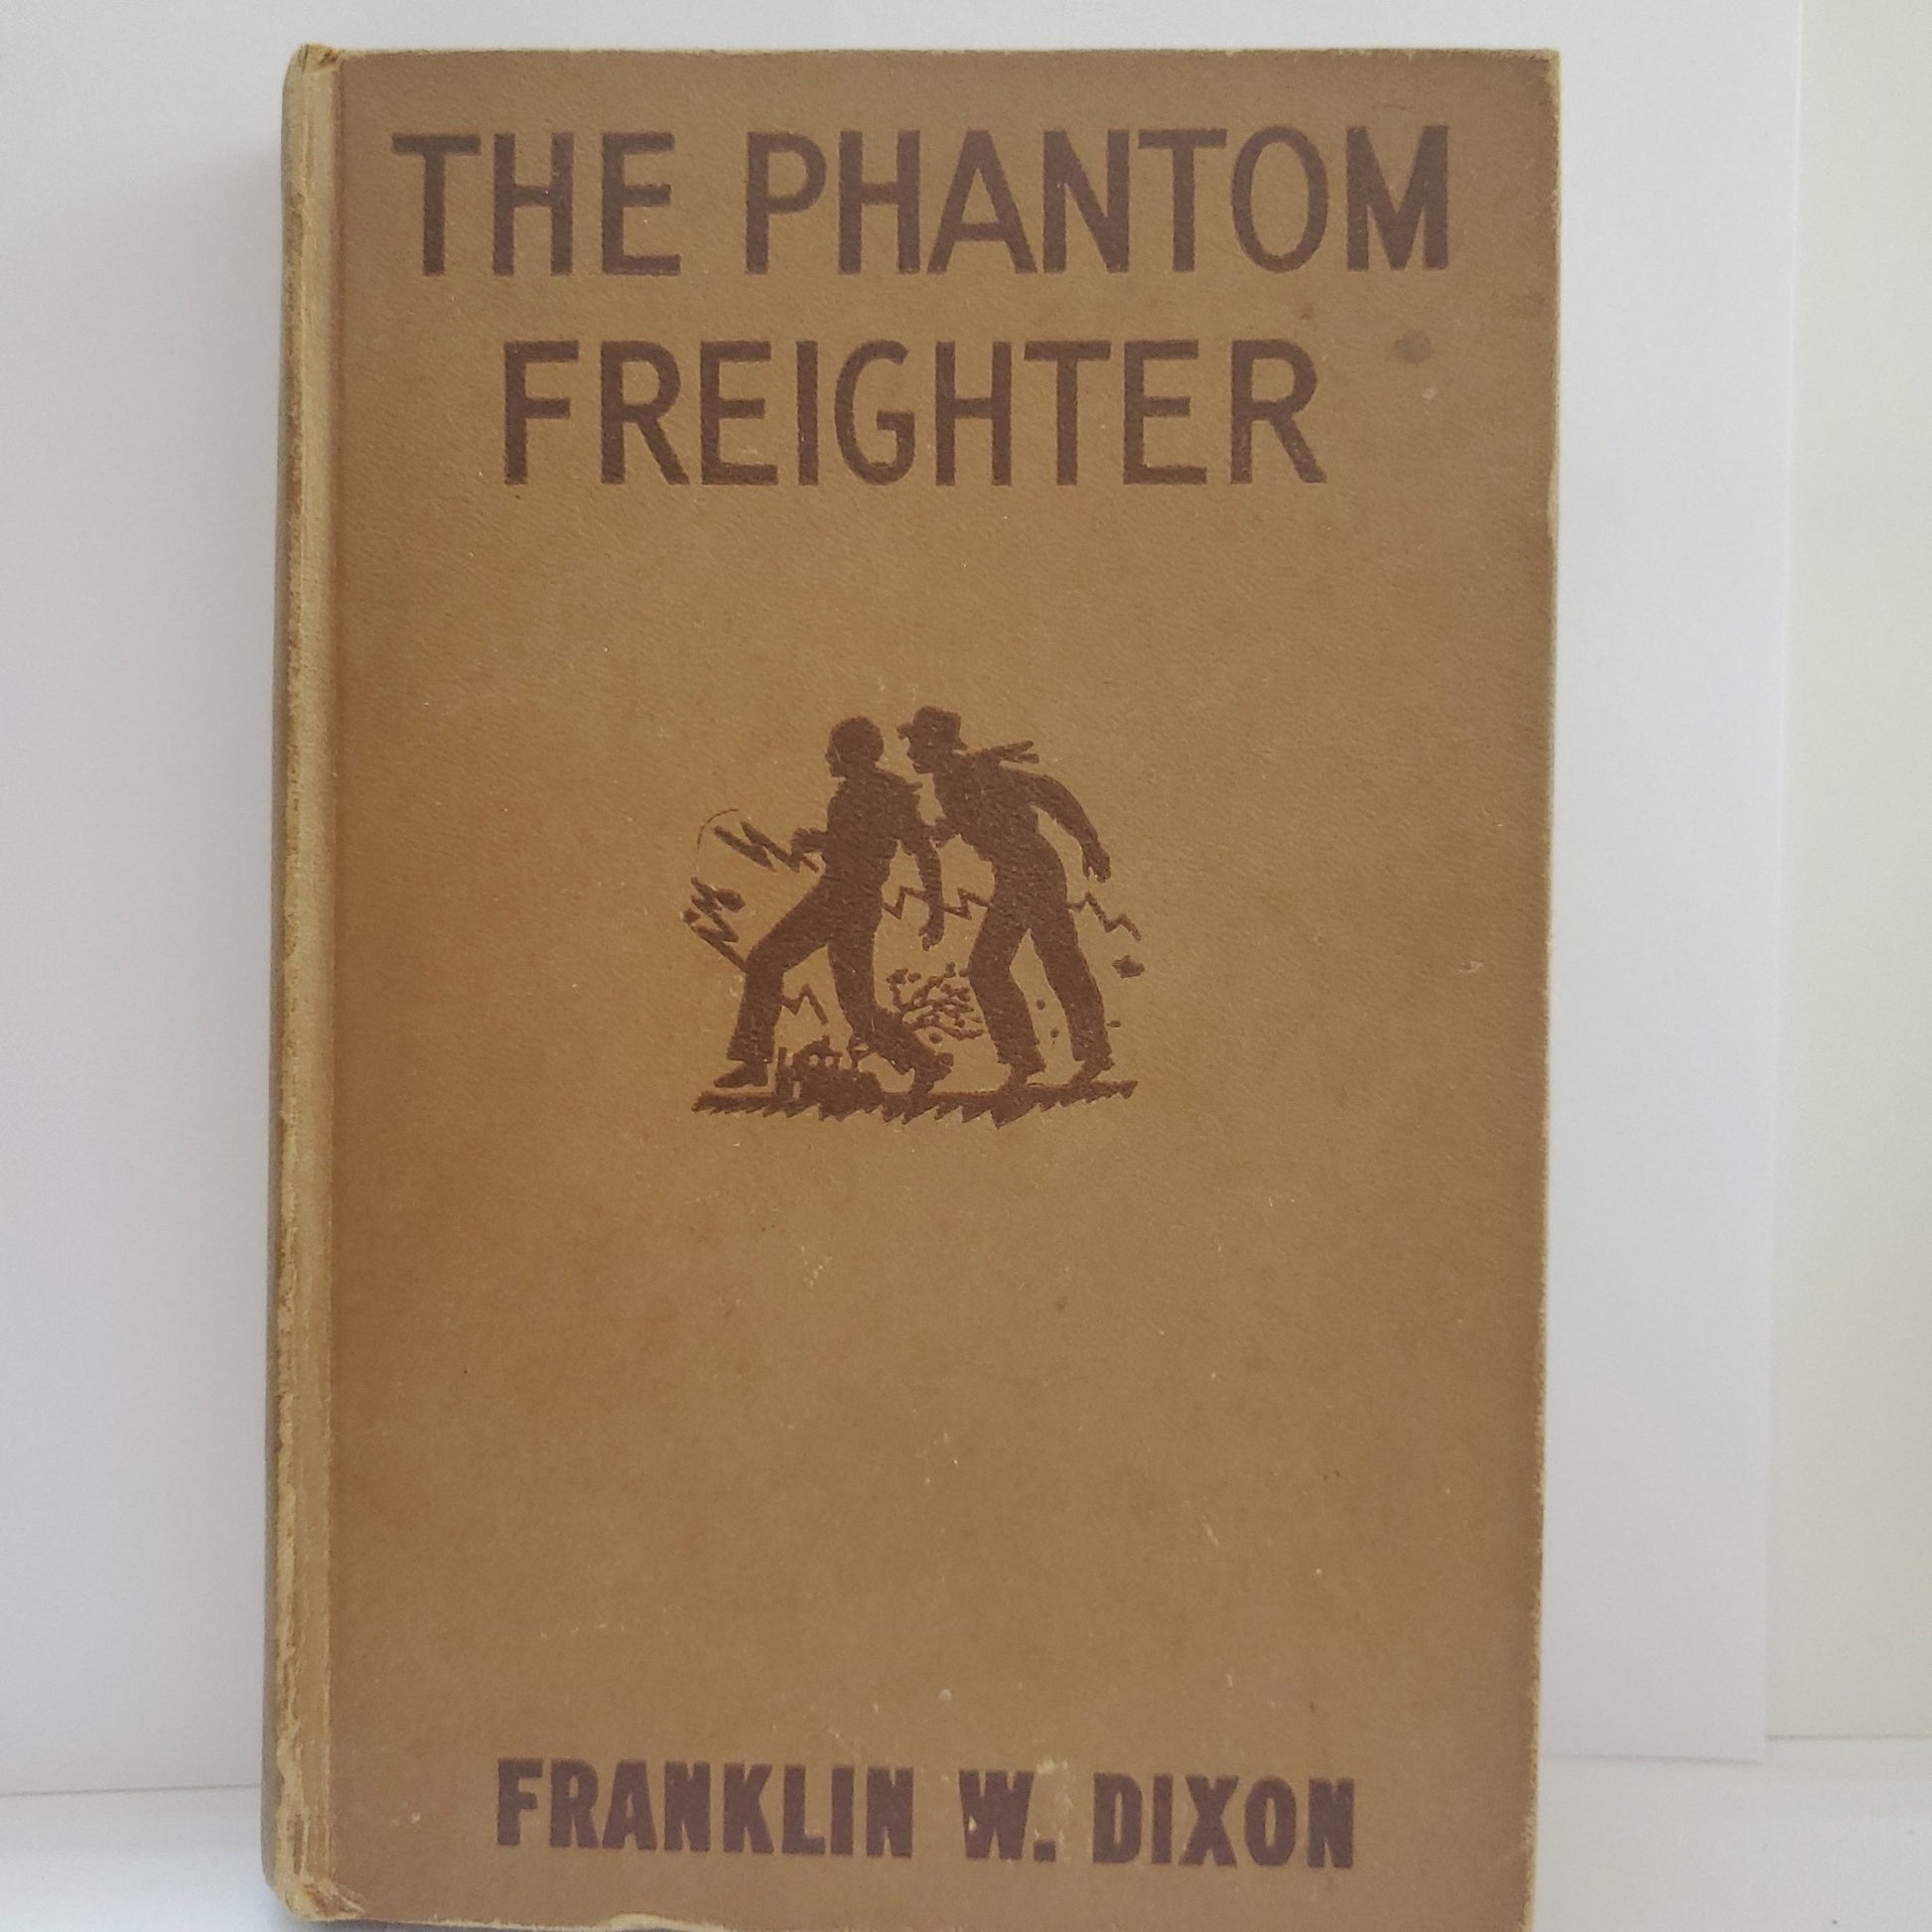 The Phantom Freighter - [ash-ling] Booksellers